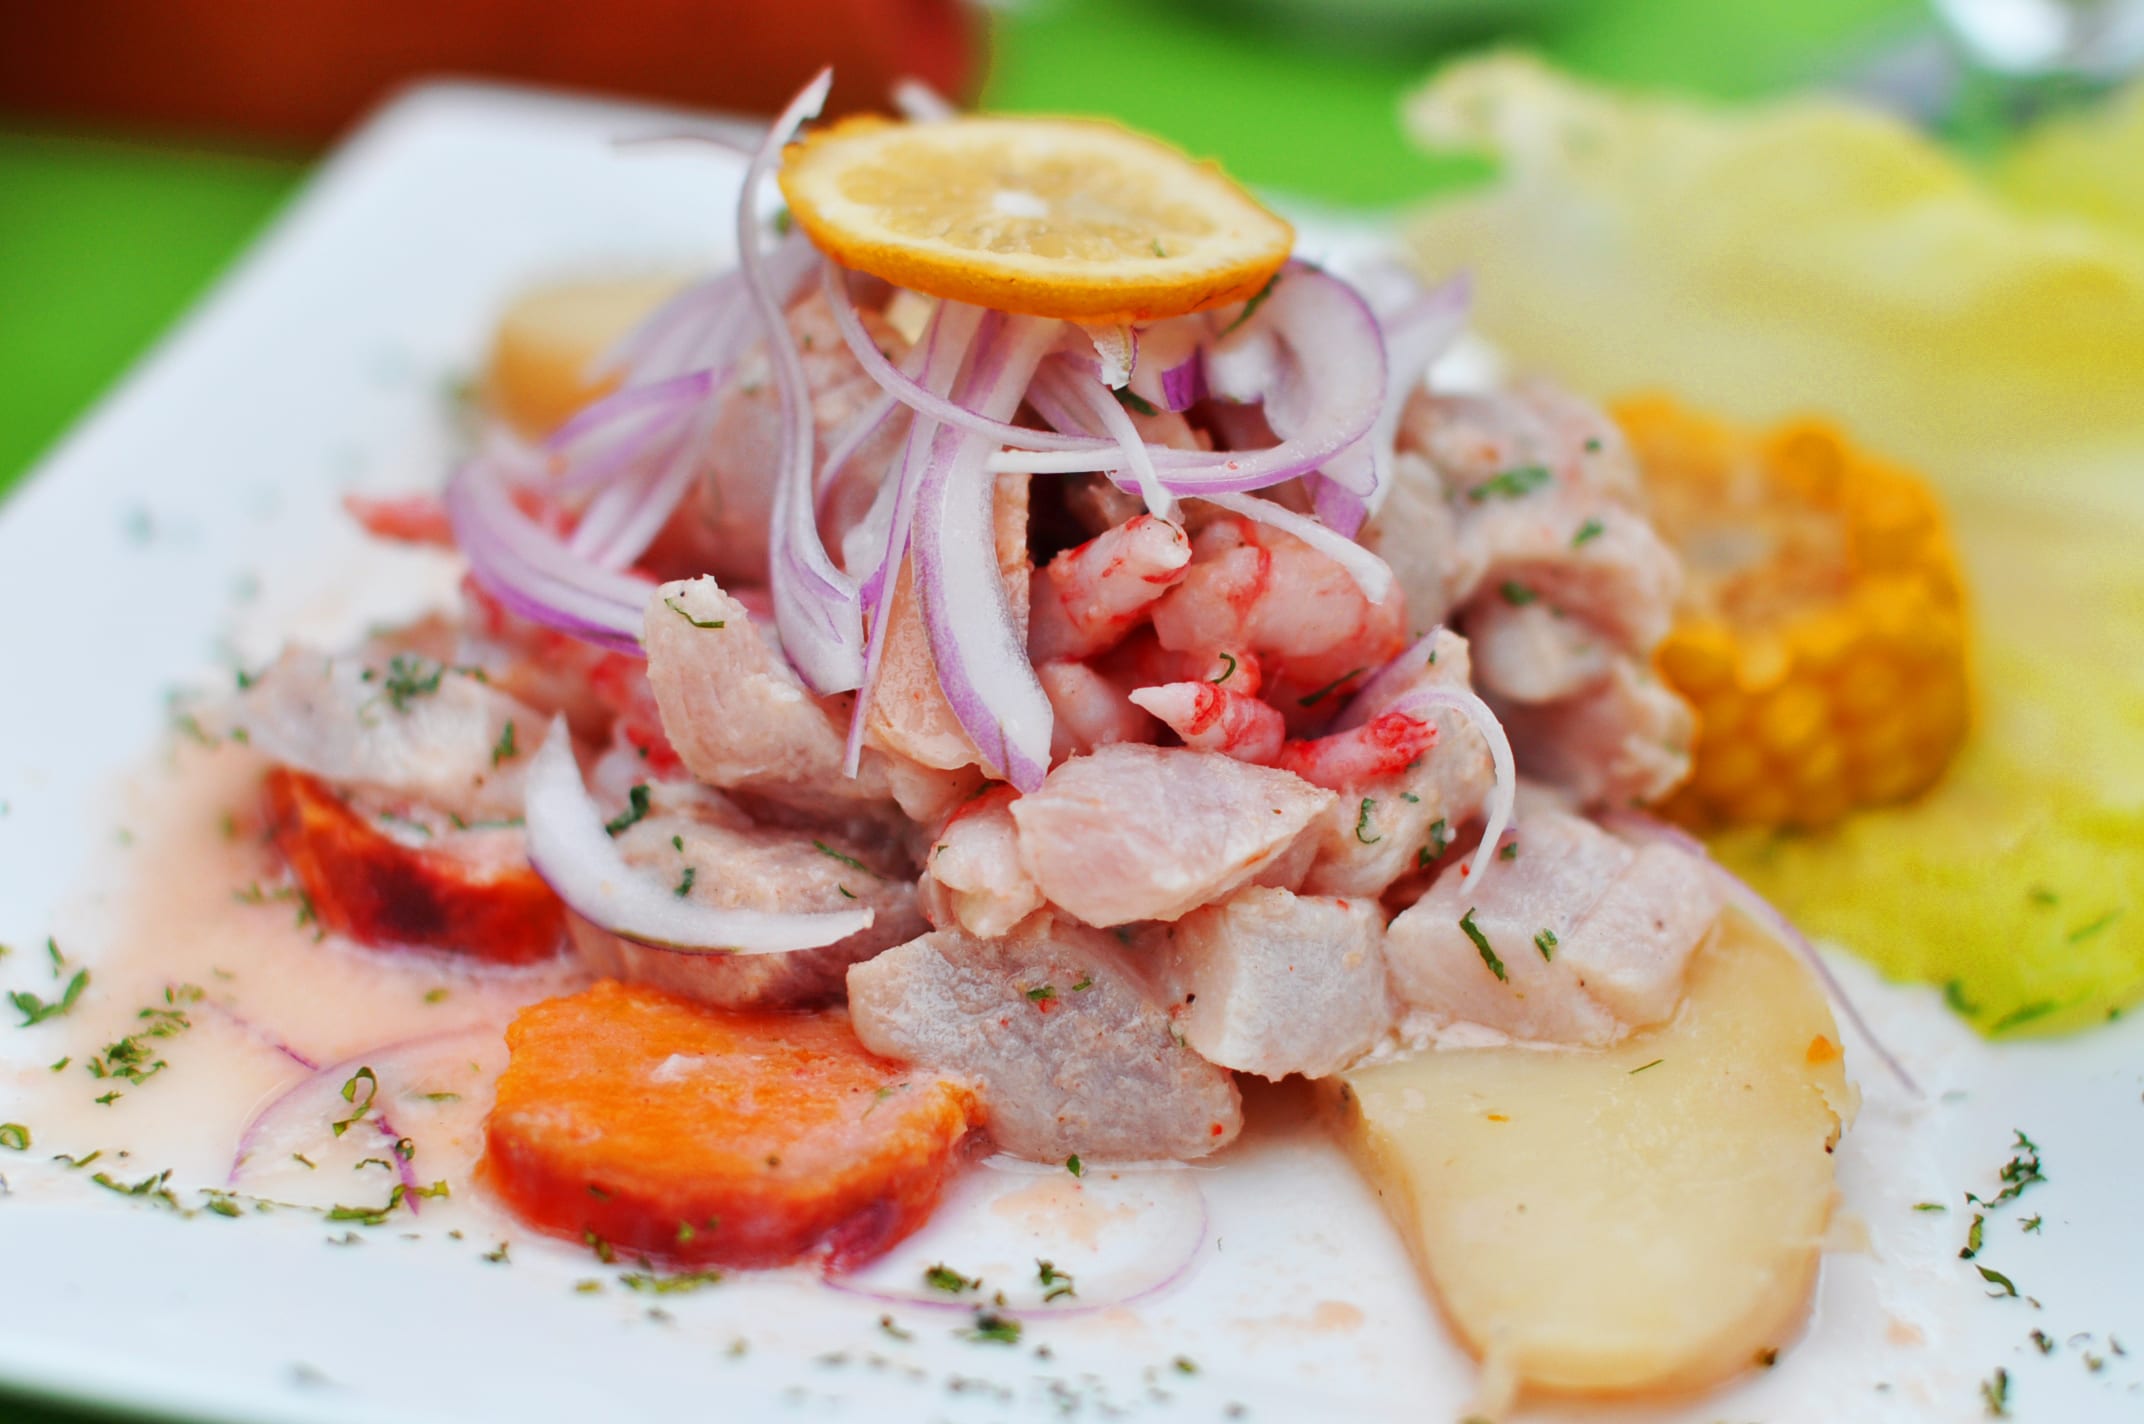 7. Ceviche - Peru. 17 Delish Street Foods to Try Before You Die – THE FLASH PACK